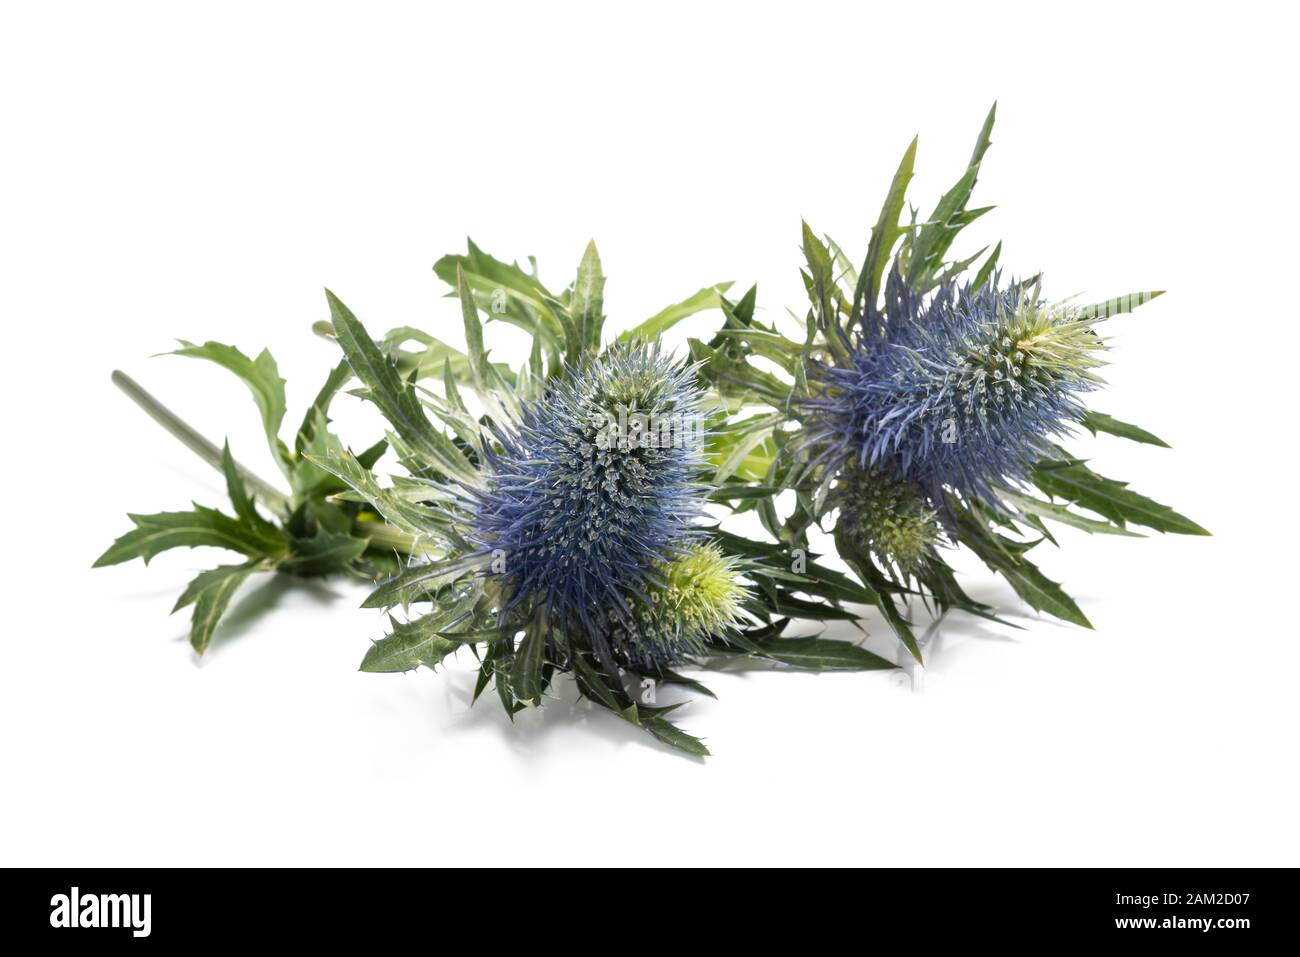 Sea holly thistles isolated on white background Stock Photo